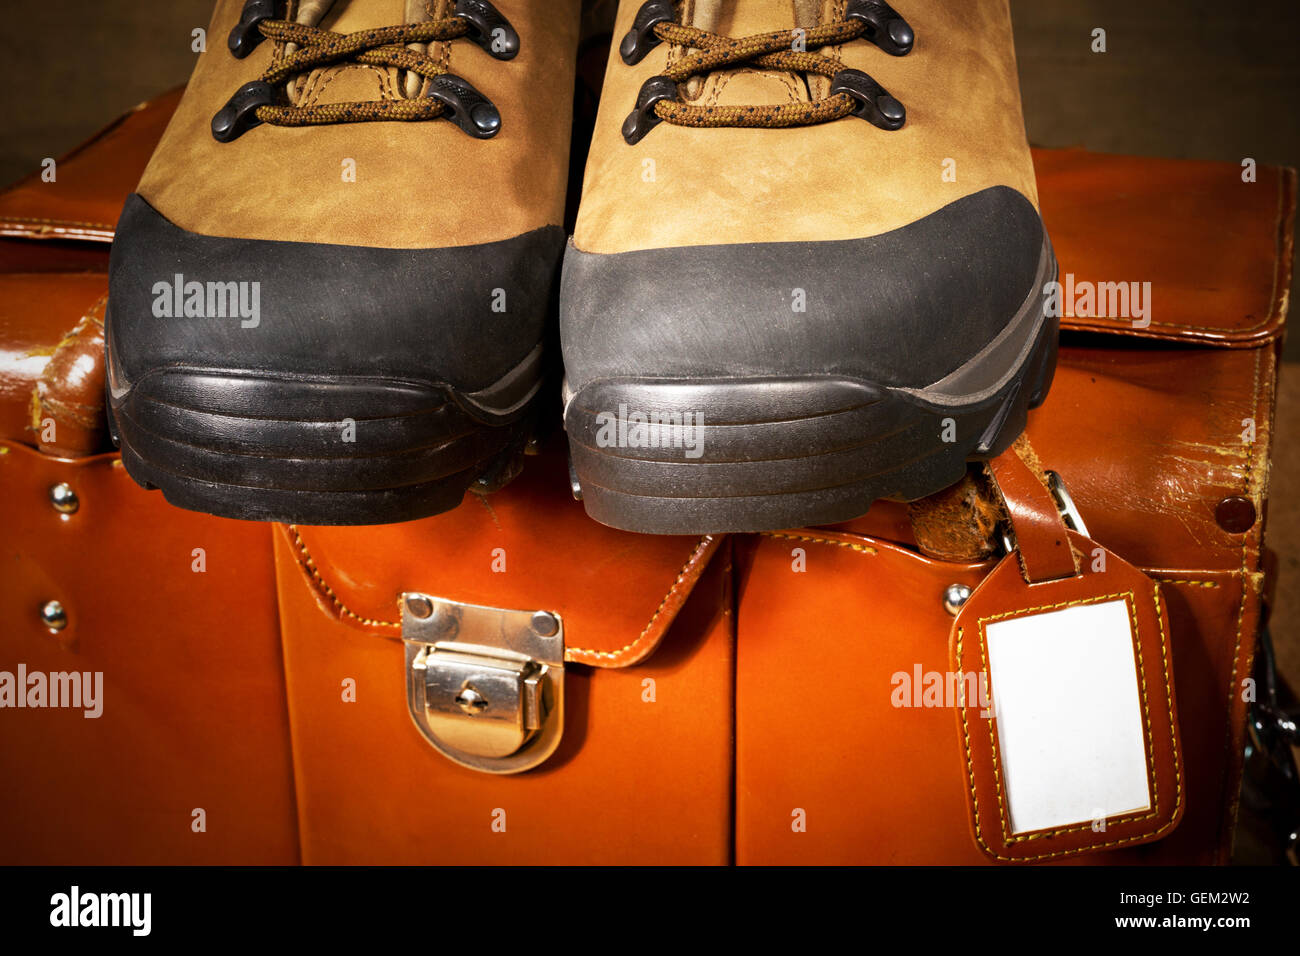 detail of walking boots and travel bag Stock Photo